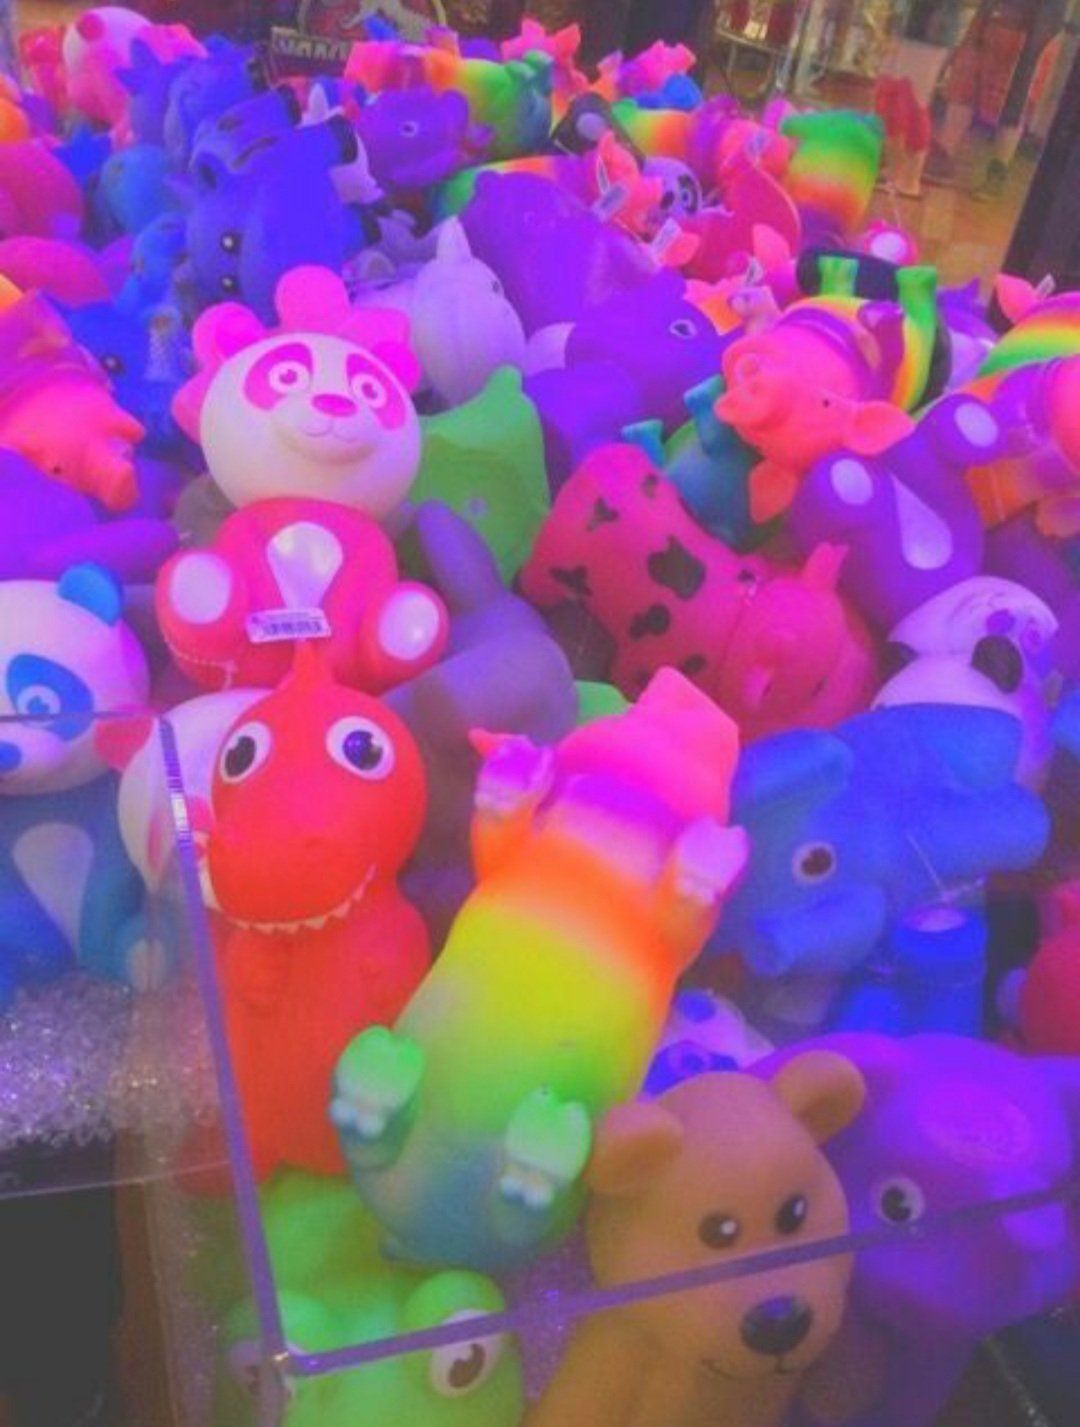 A bunch of stuffed animals in different colors - Kidcore